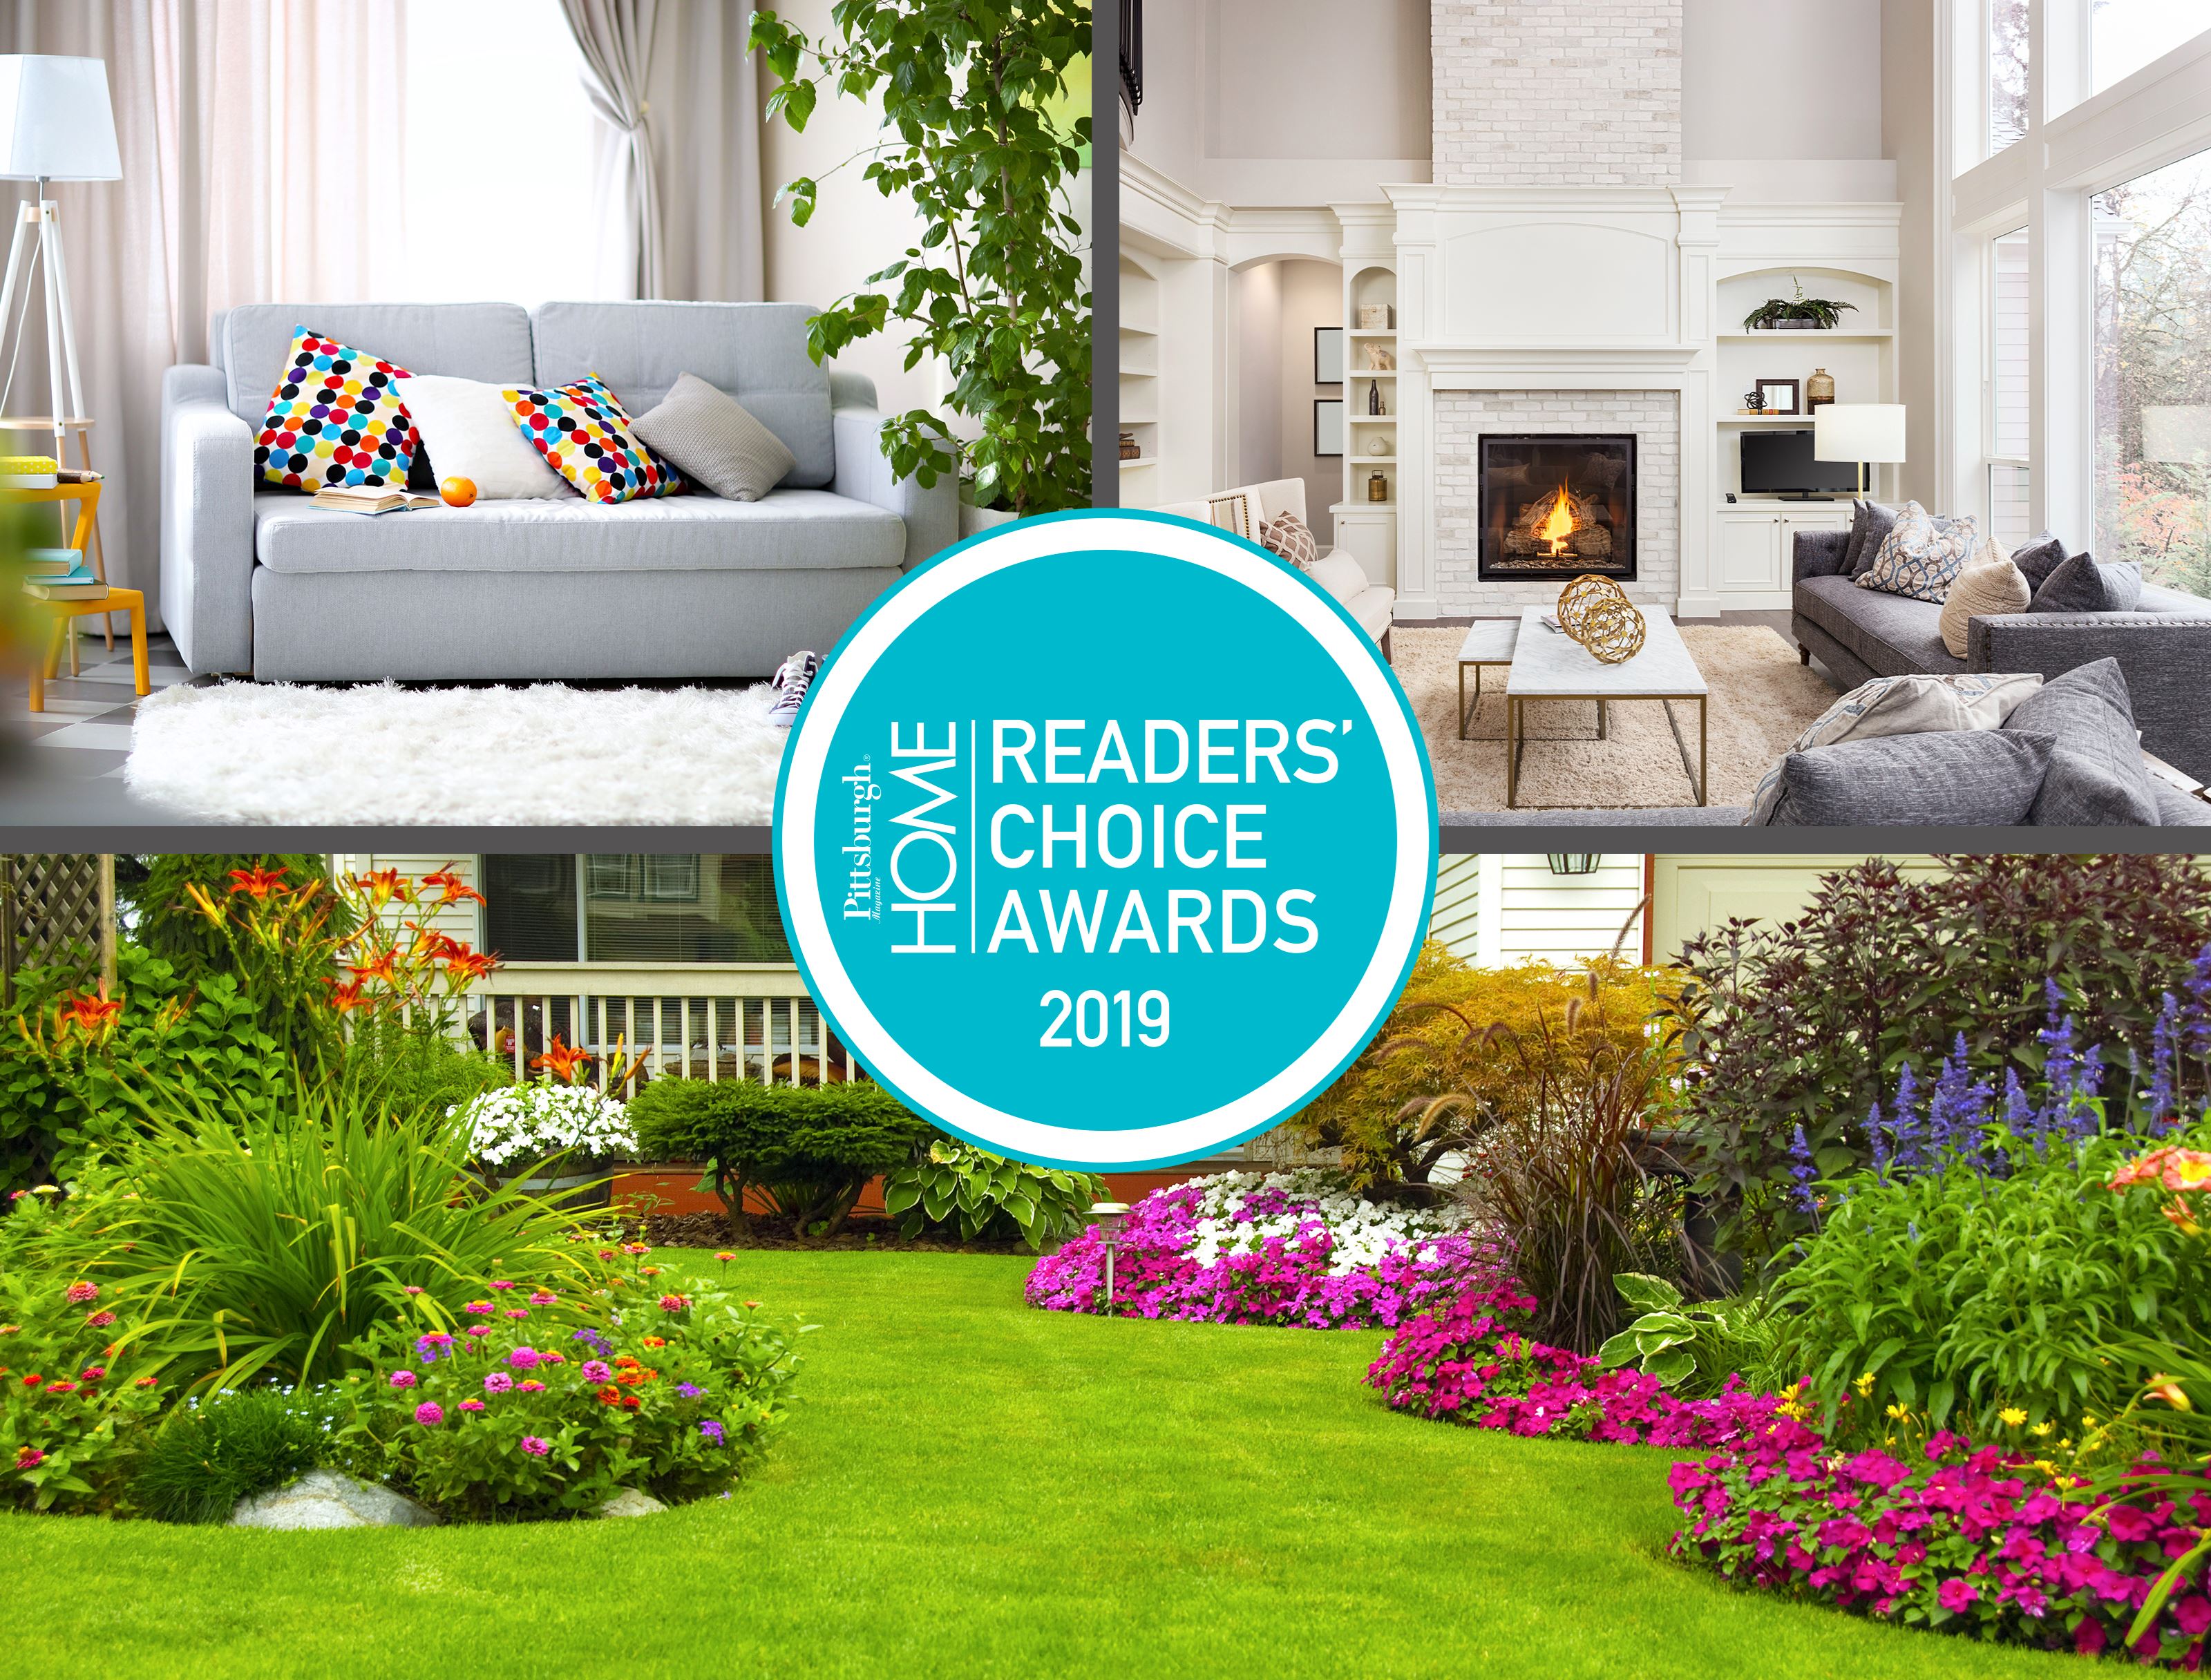 Architecture Firms 2019 Home Readers Choice Poll Winners